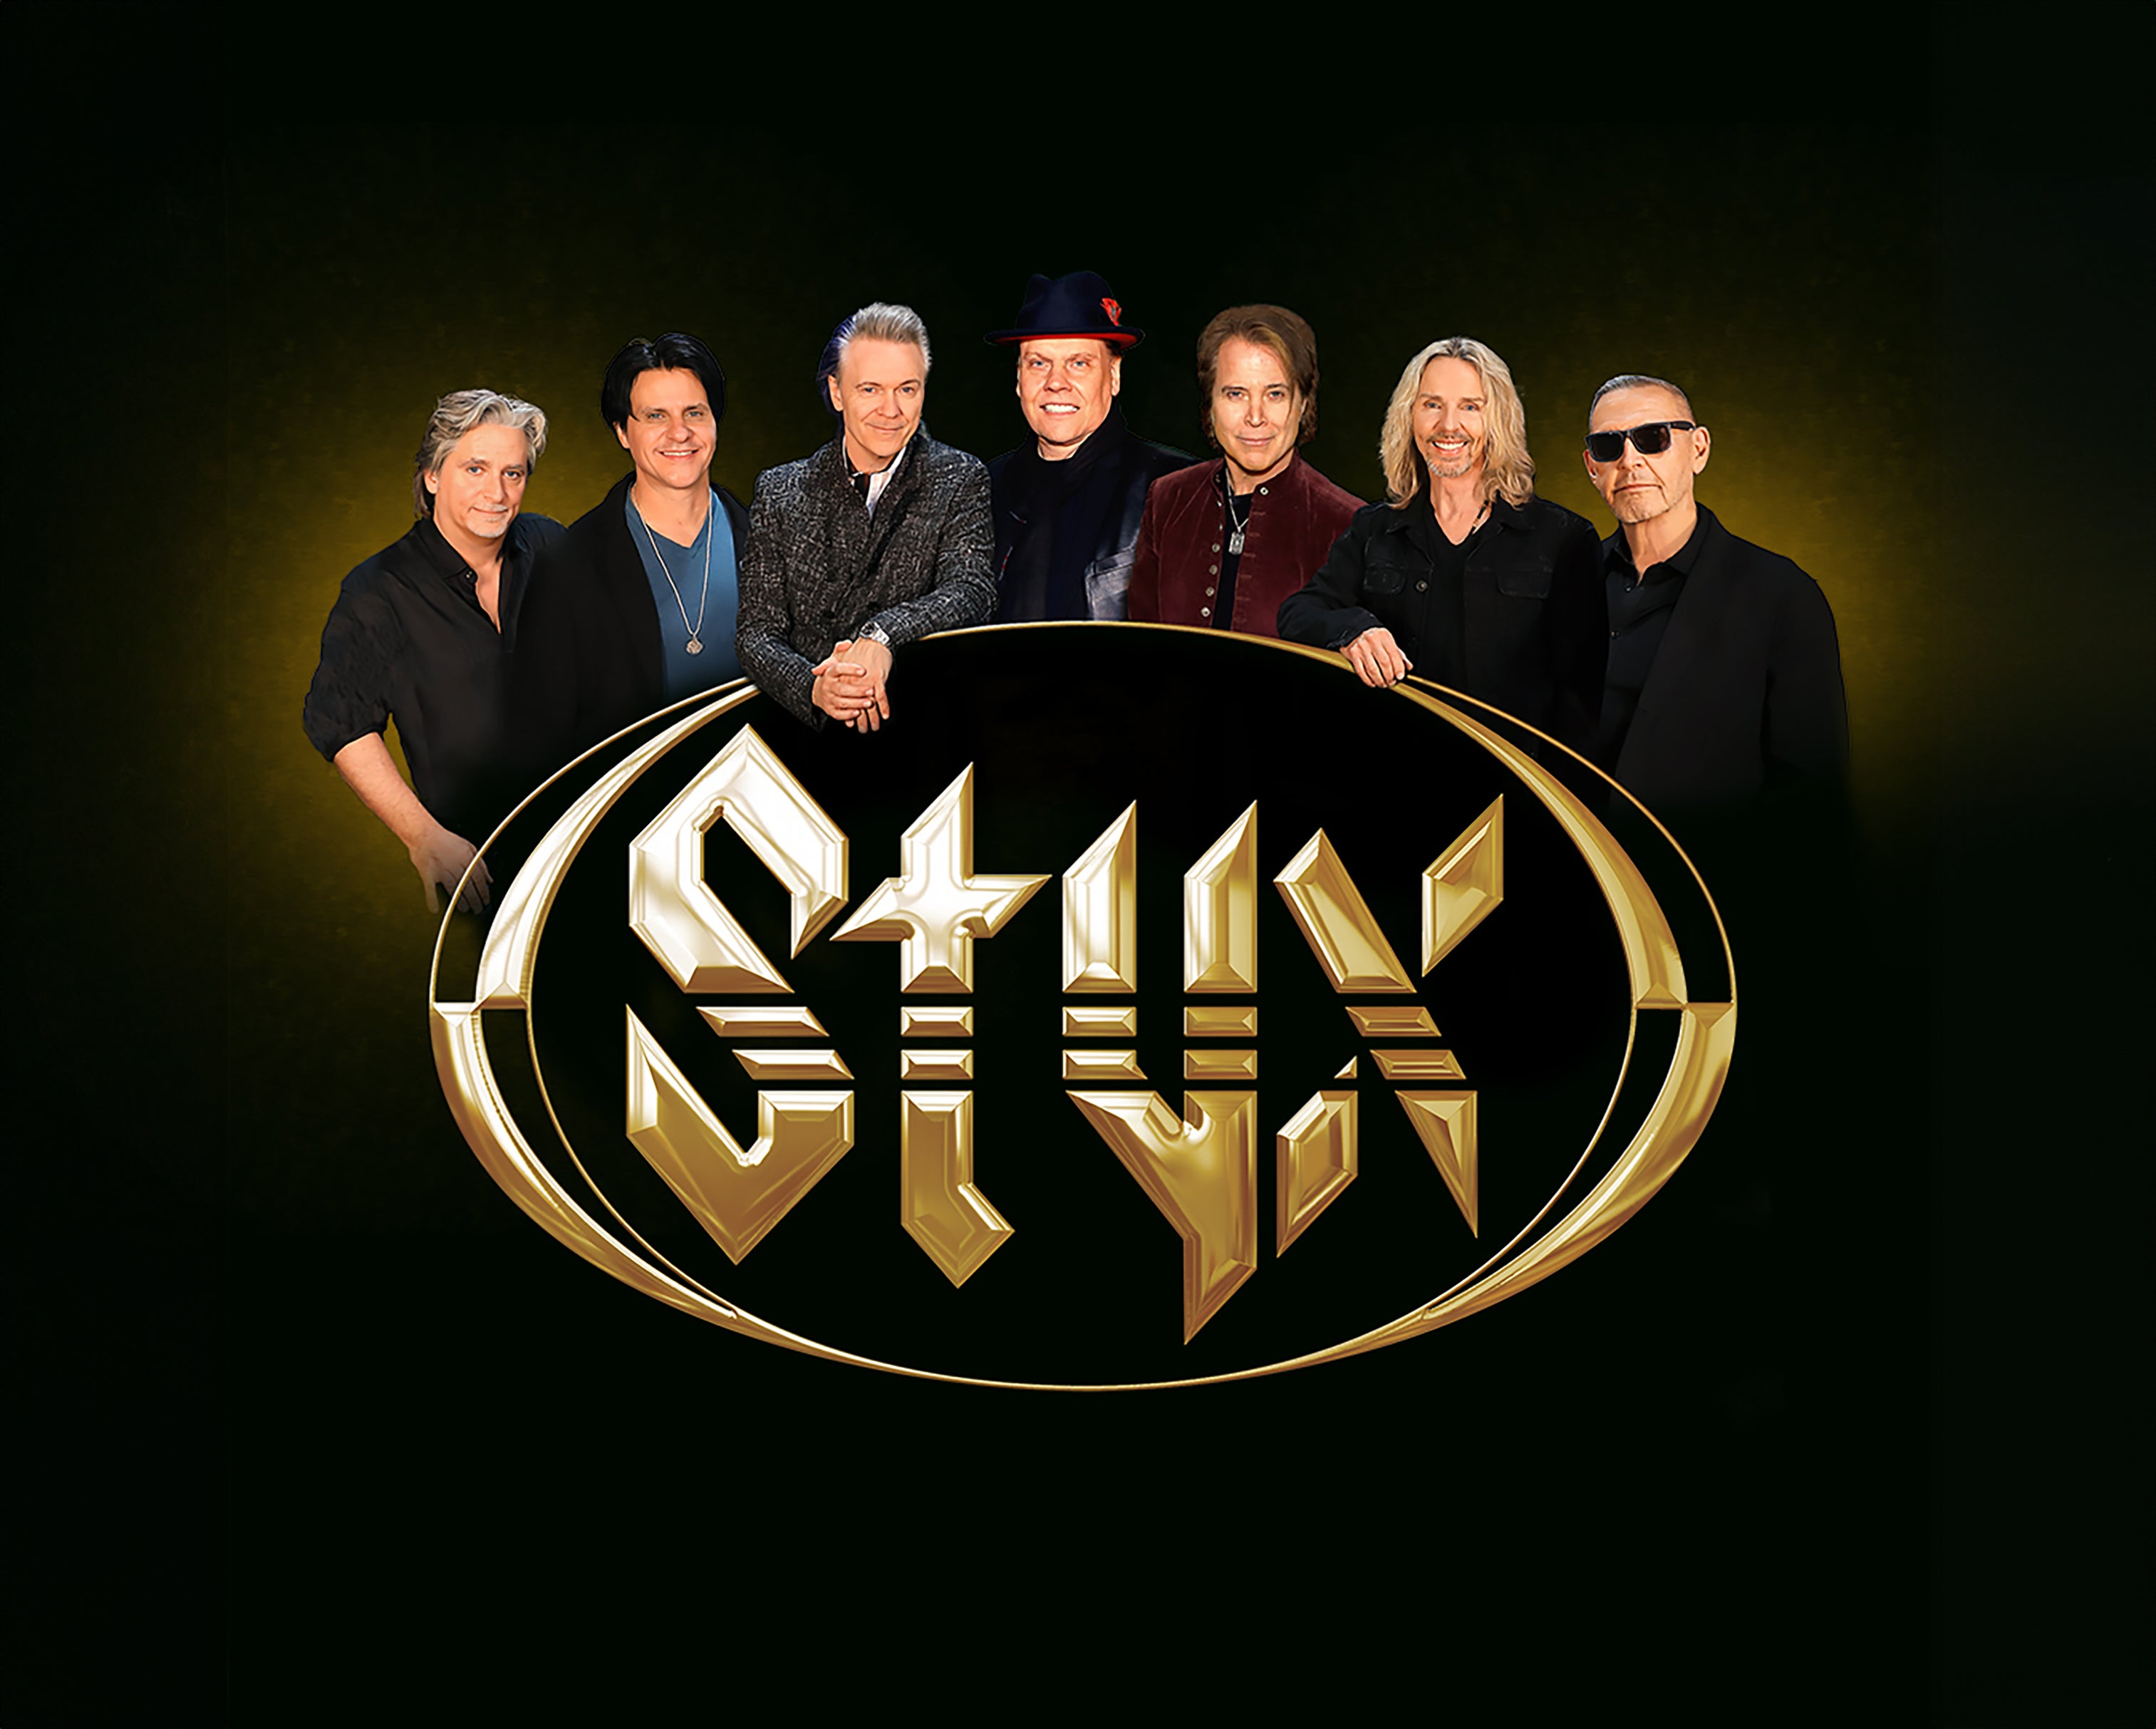 Styx in Independence promo photo for Official Platinum presale offer code